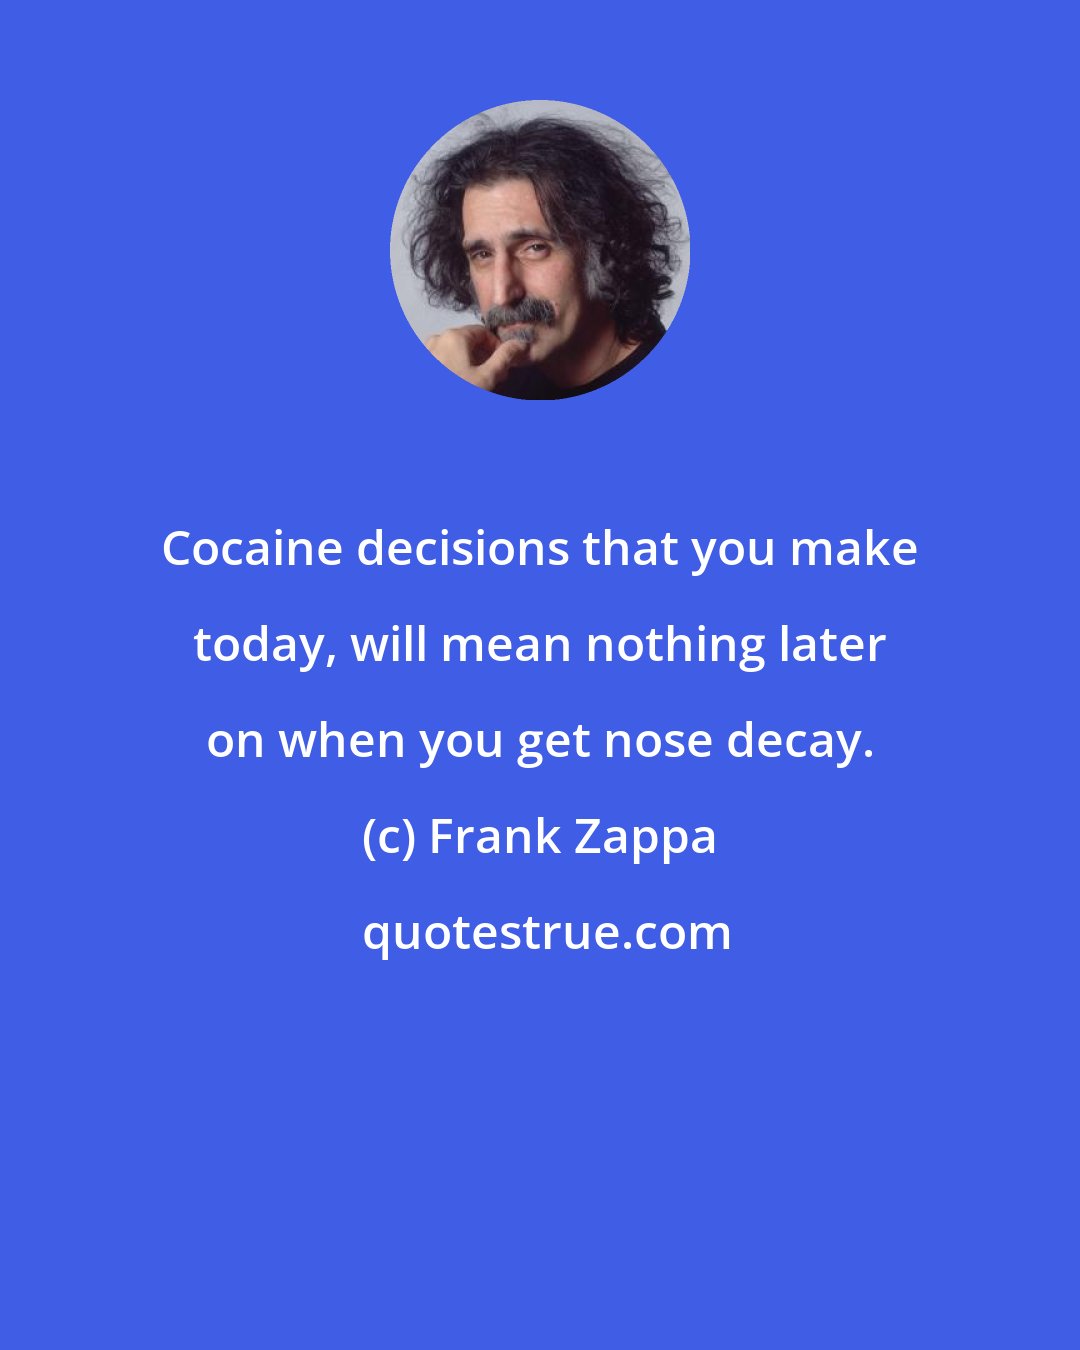 Frank Zappa: Cocaine decisions that you make today, will mean nothing later on when you get nose decay.